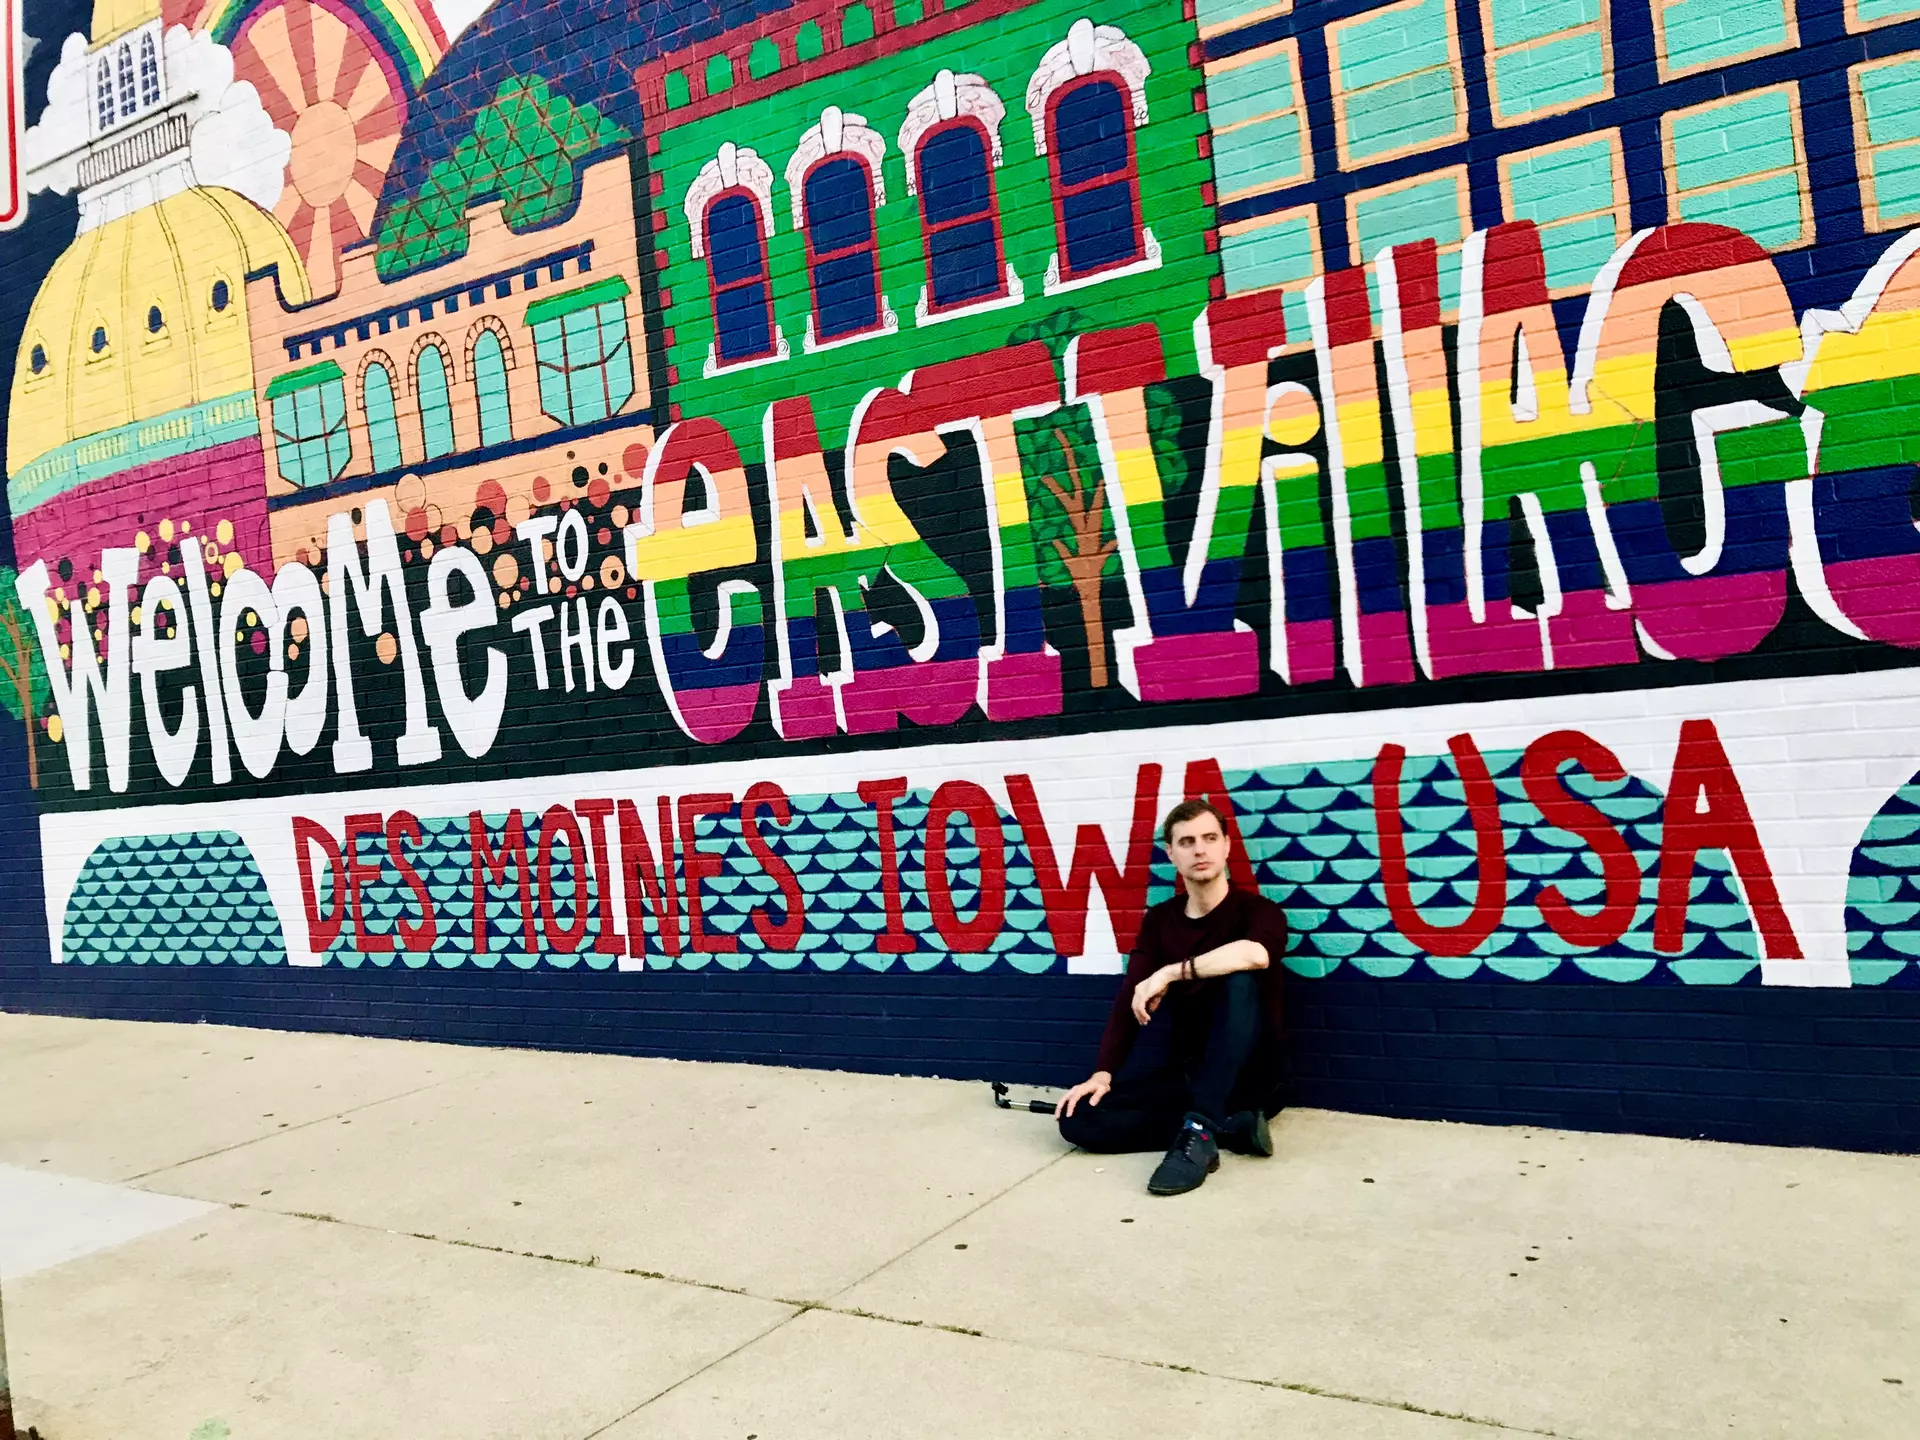 Michael sitting in front of a mural in East Village, a neighborhood in Des Moines, Iowa.